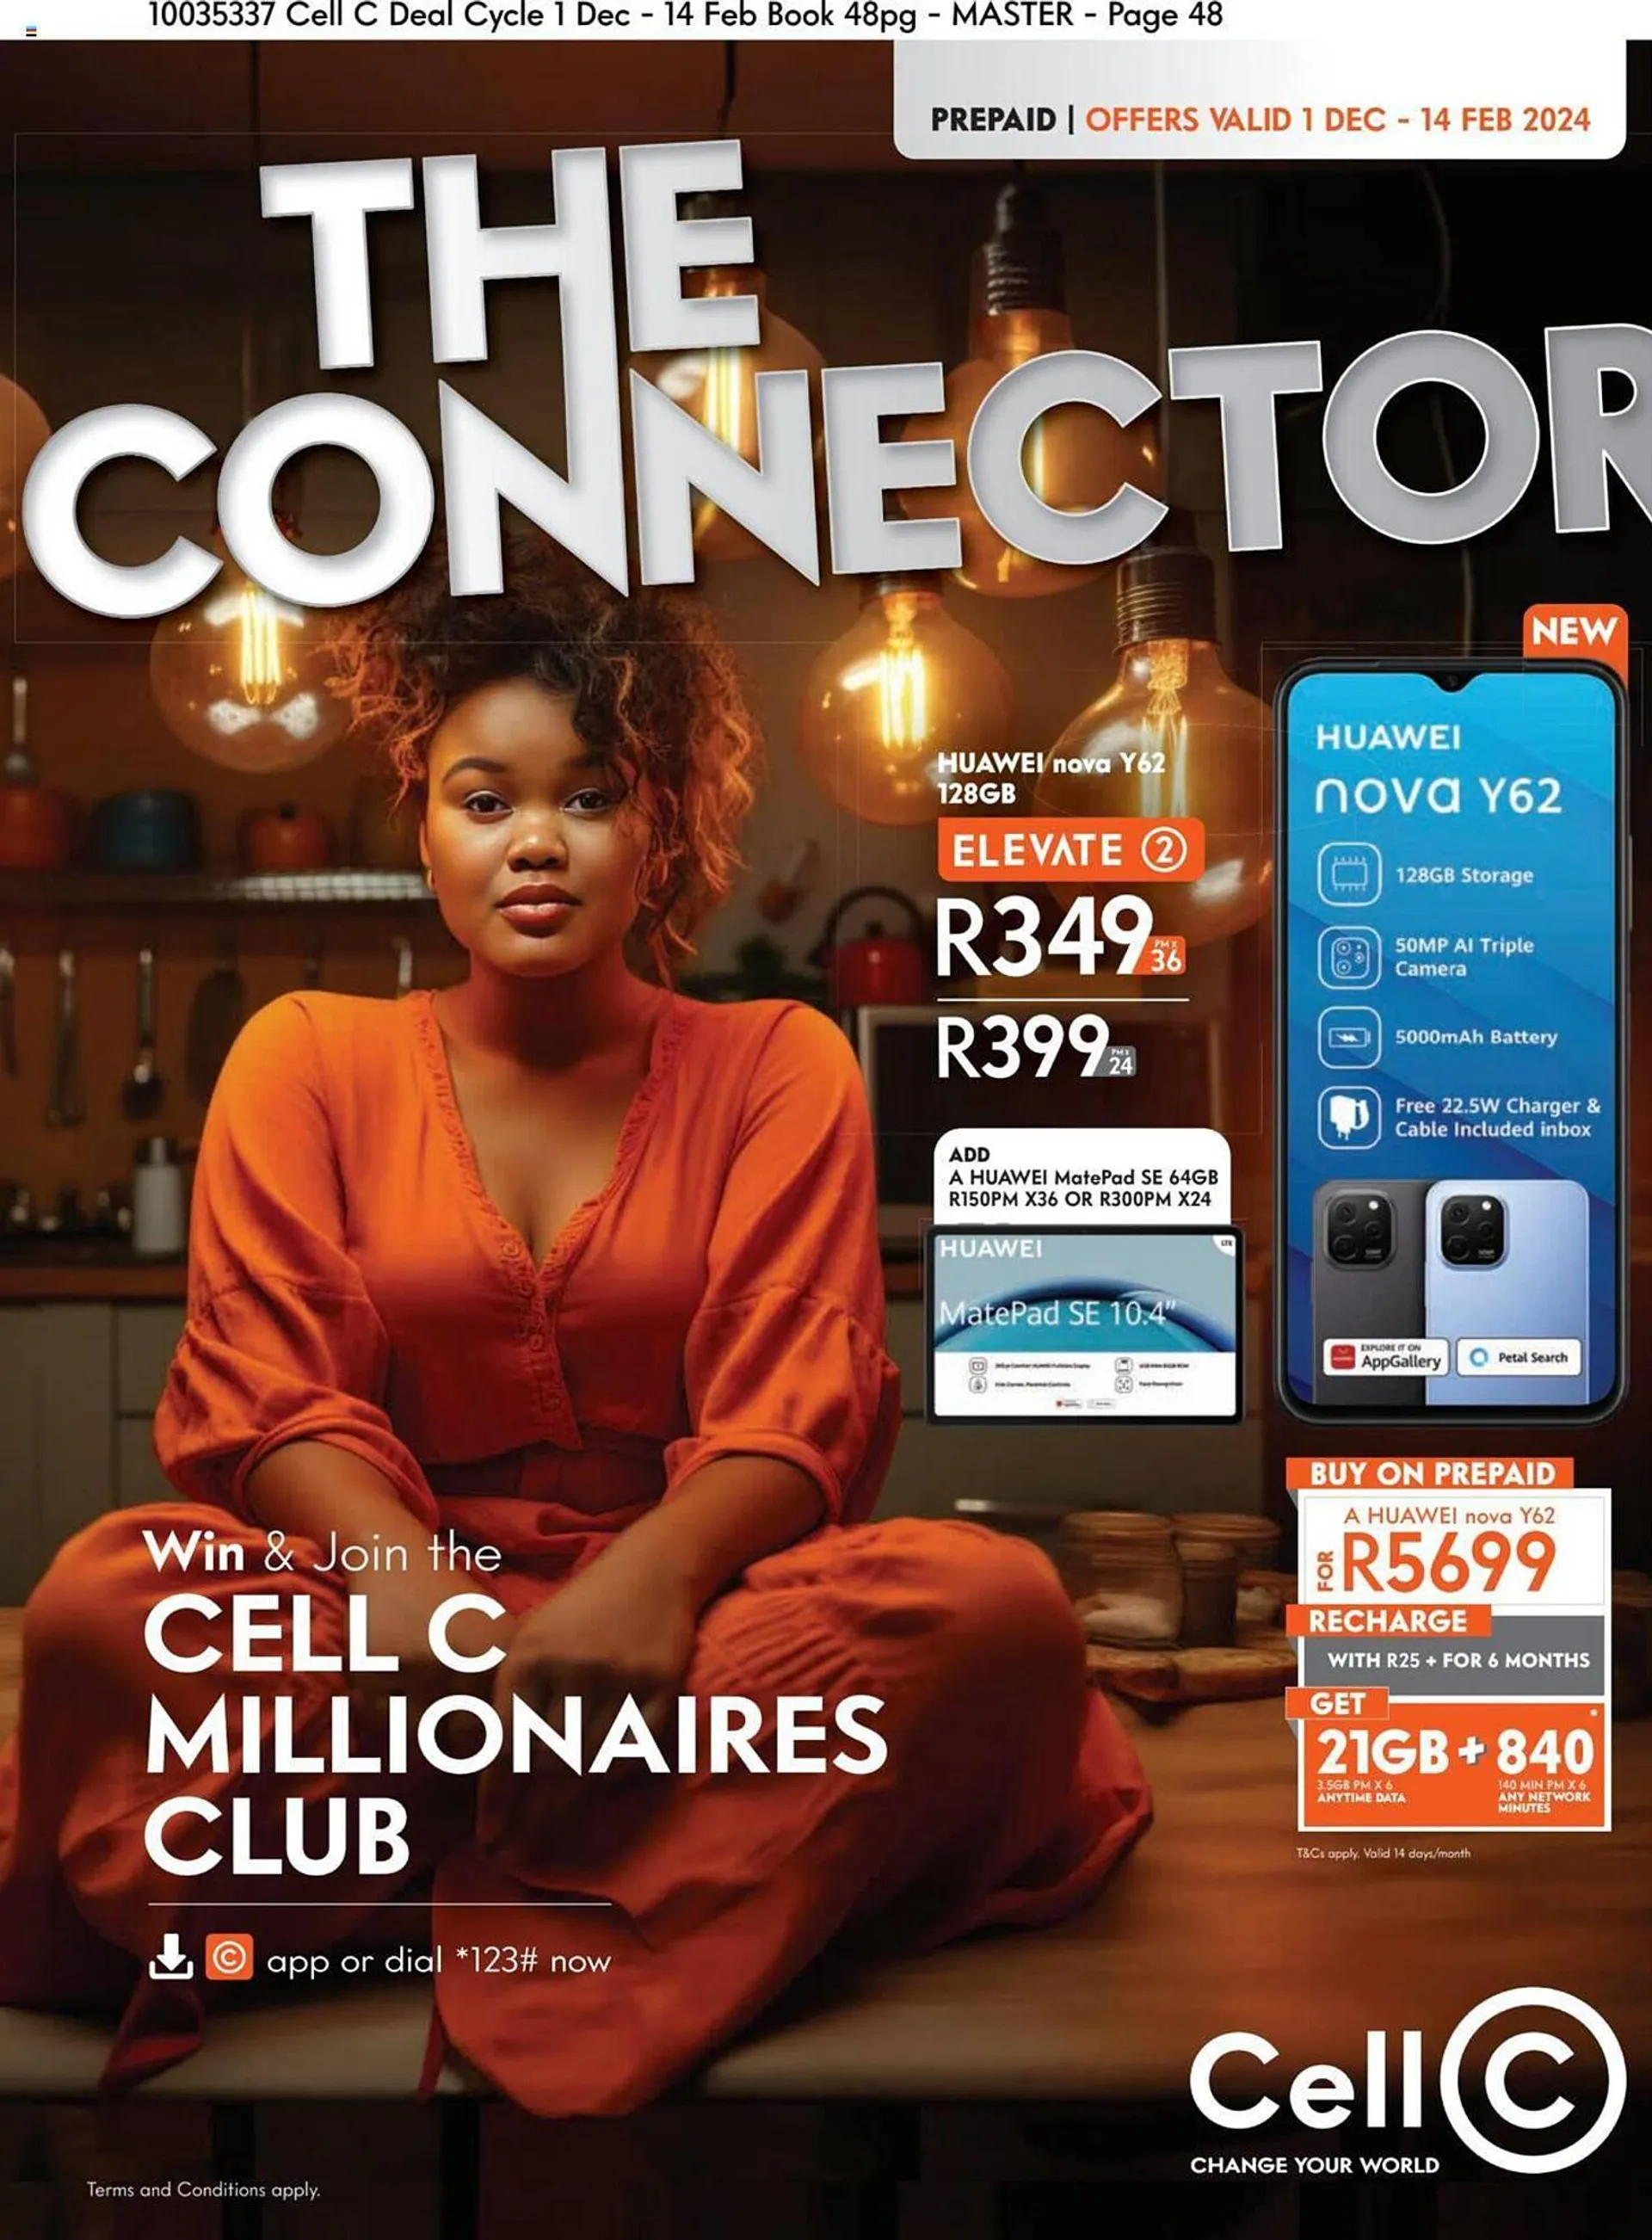 Cell C catalogue - 48